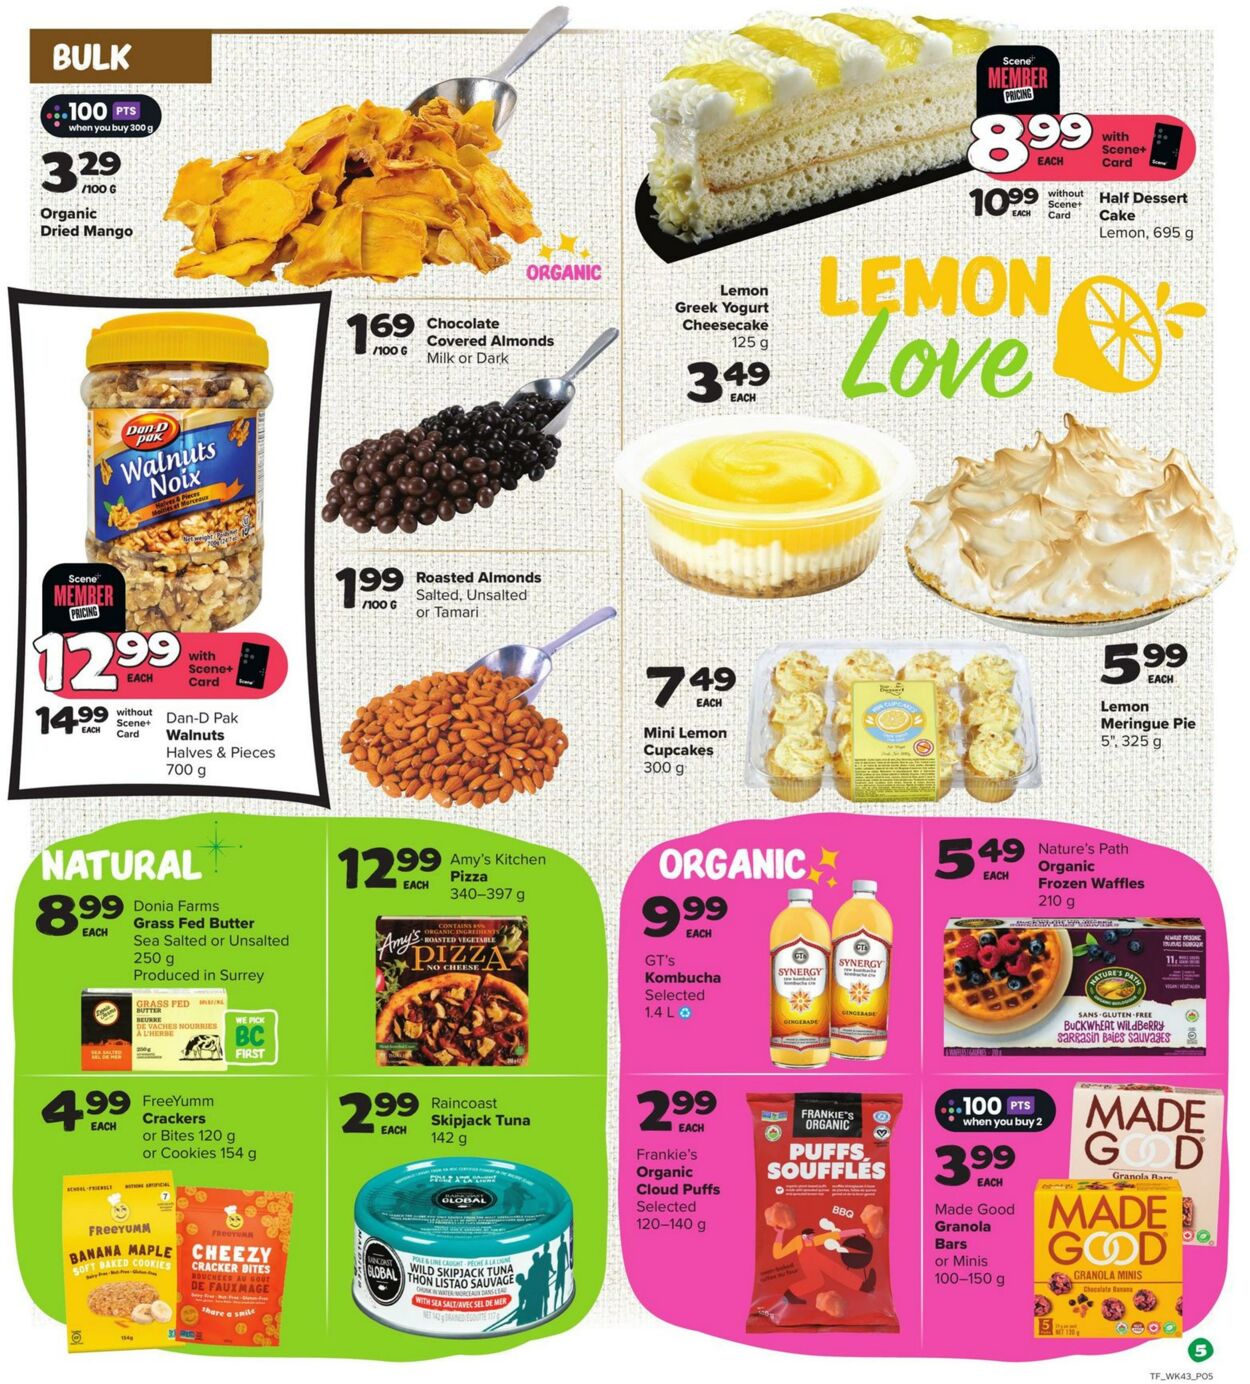 Thrifty Foods Flyer from 02/22/2024